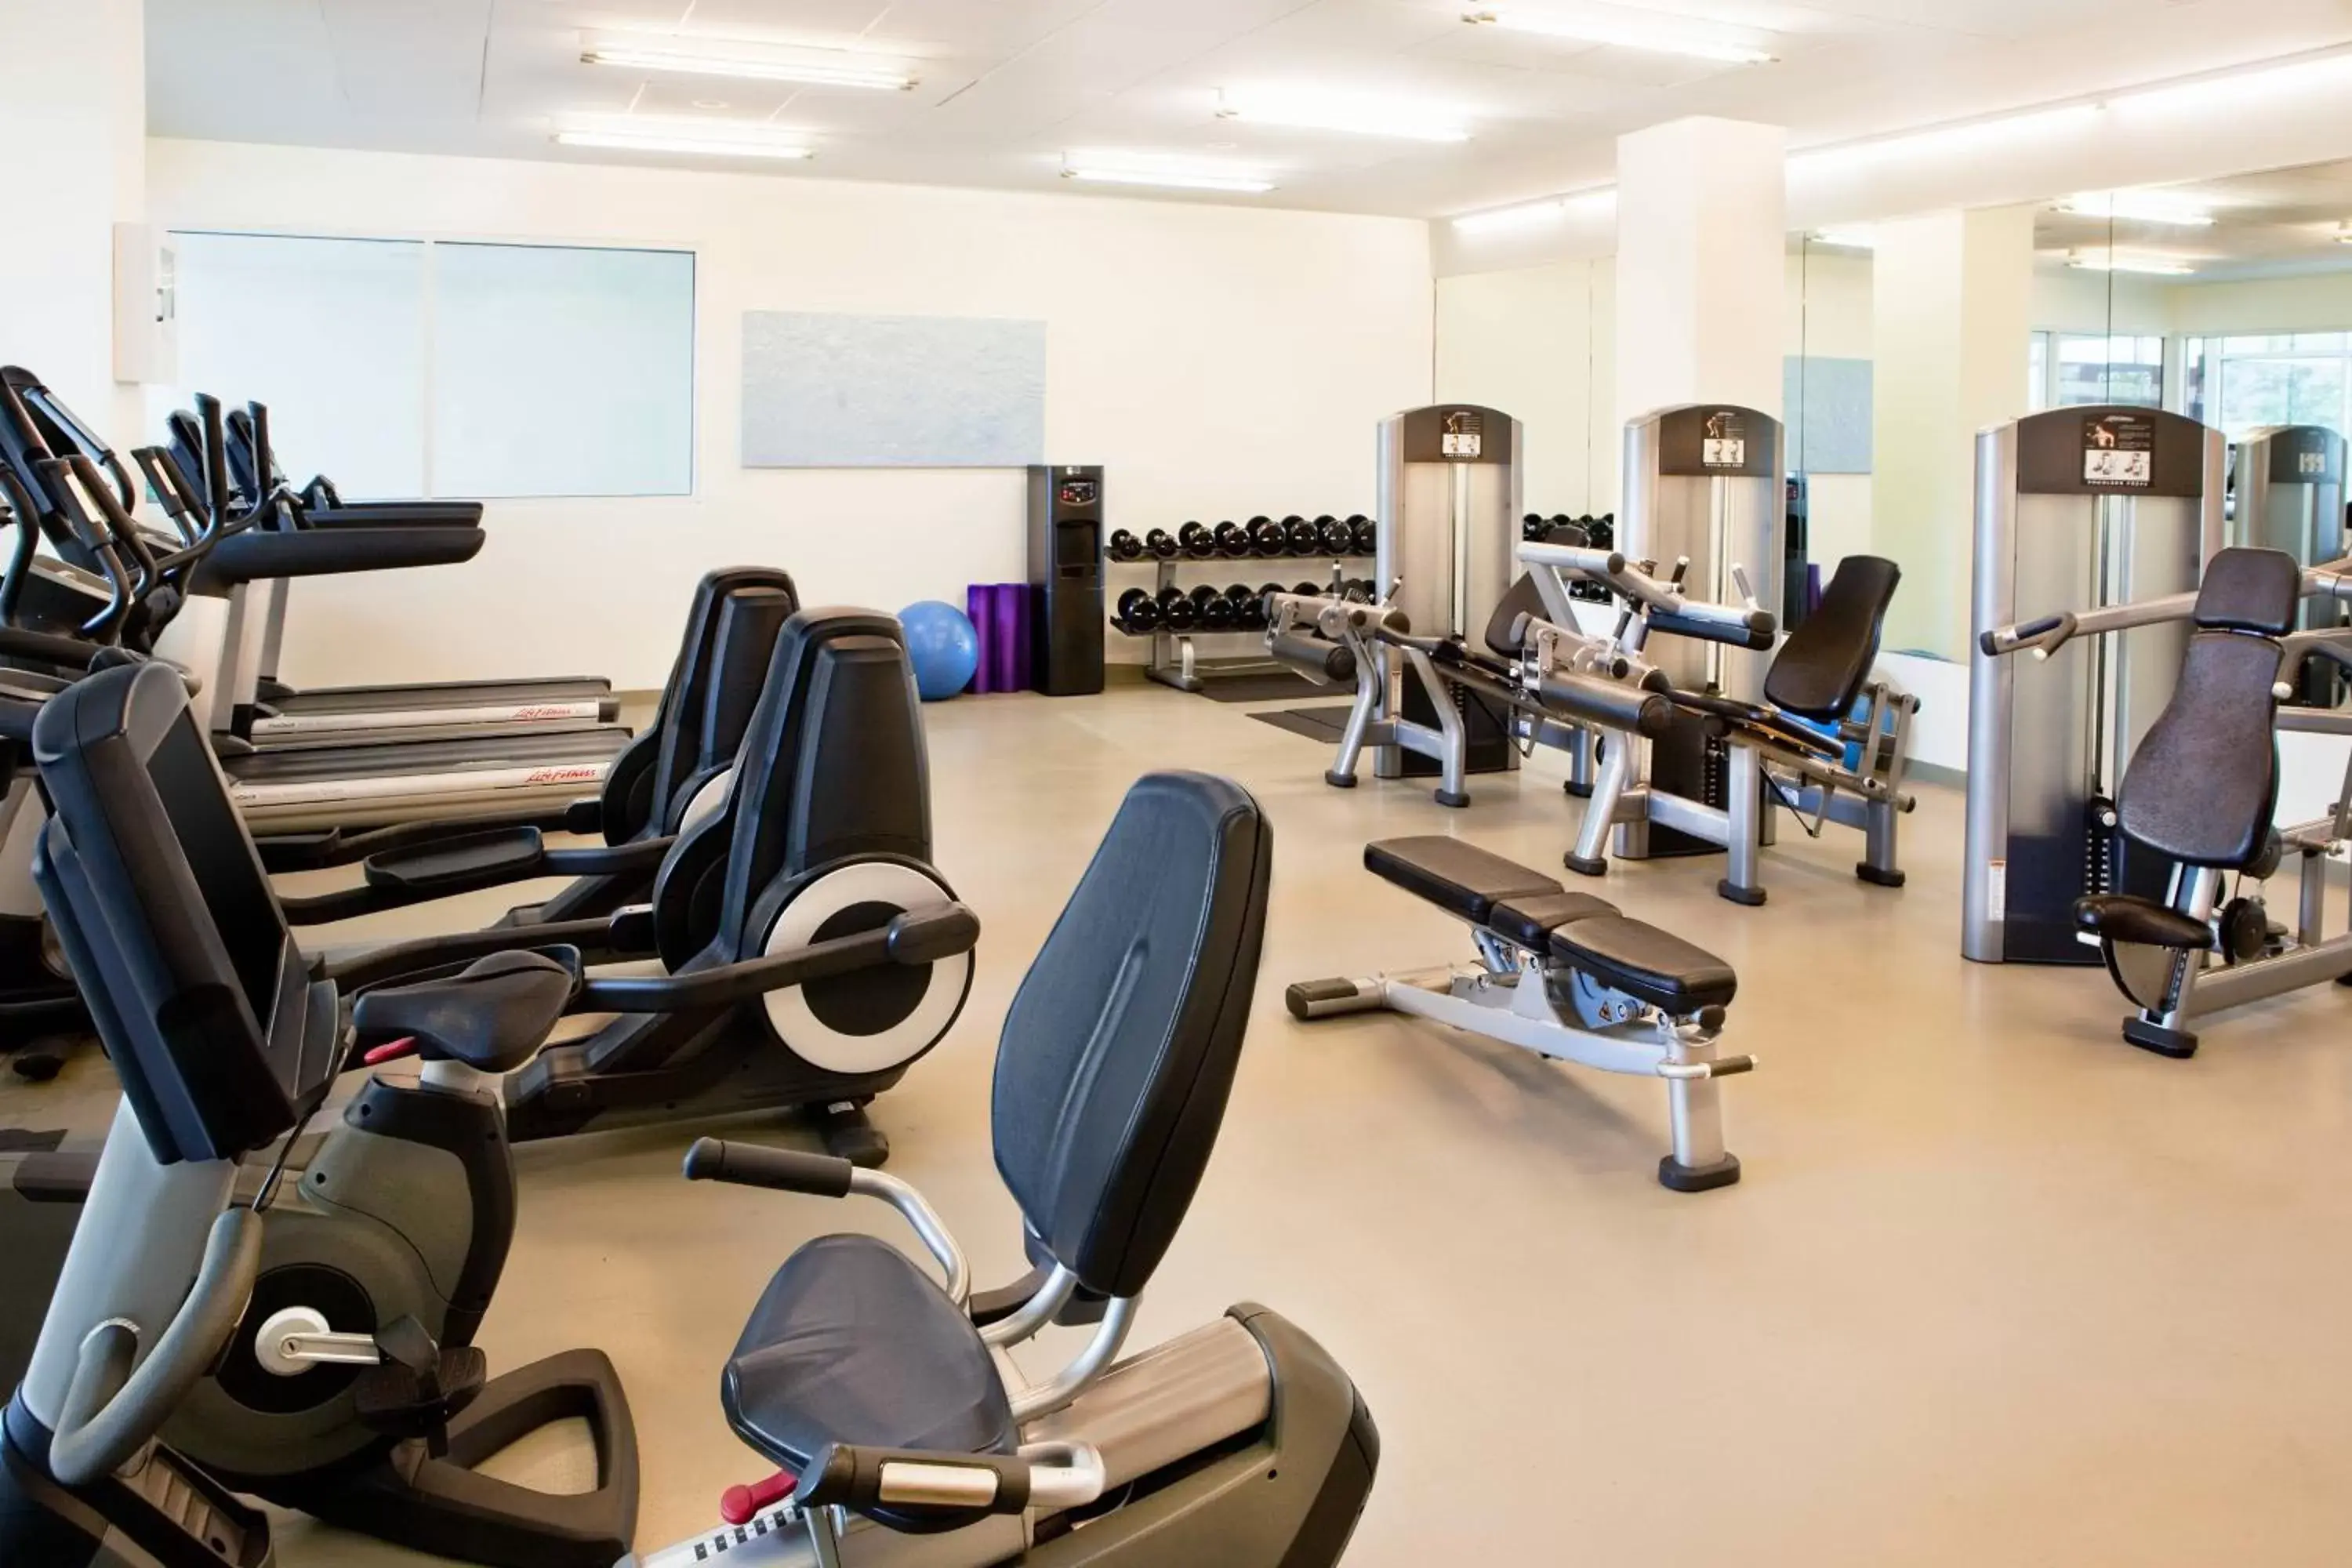 Fitness centre/facilities, Fitness Center/Facilities in Element Arundel Mills BWI Airport